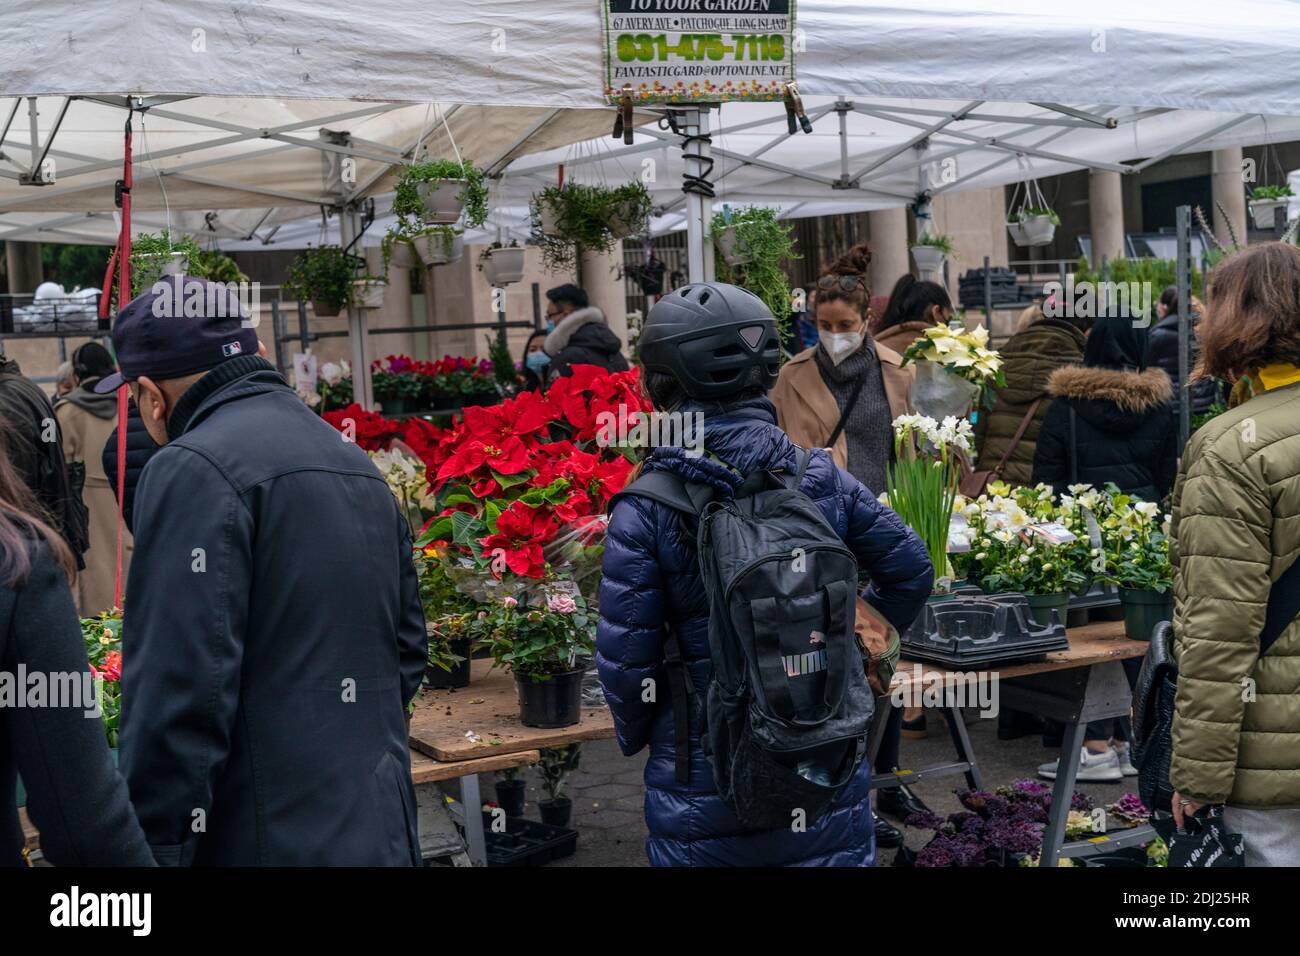 New York, NY - December 12, 2020: People shopping during Holiday season at Union Square farmers market Stock Photo